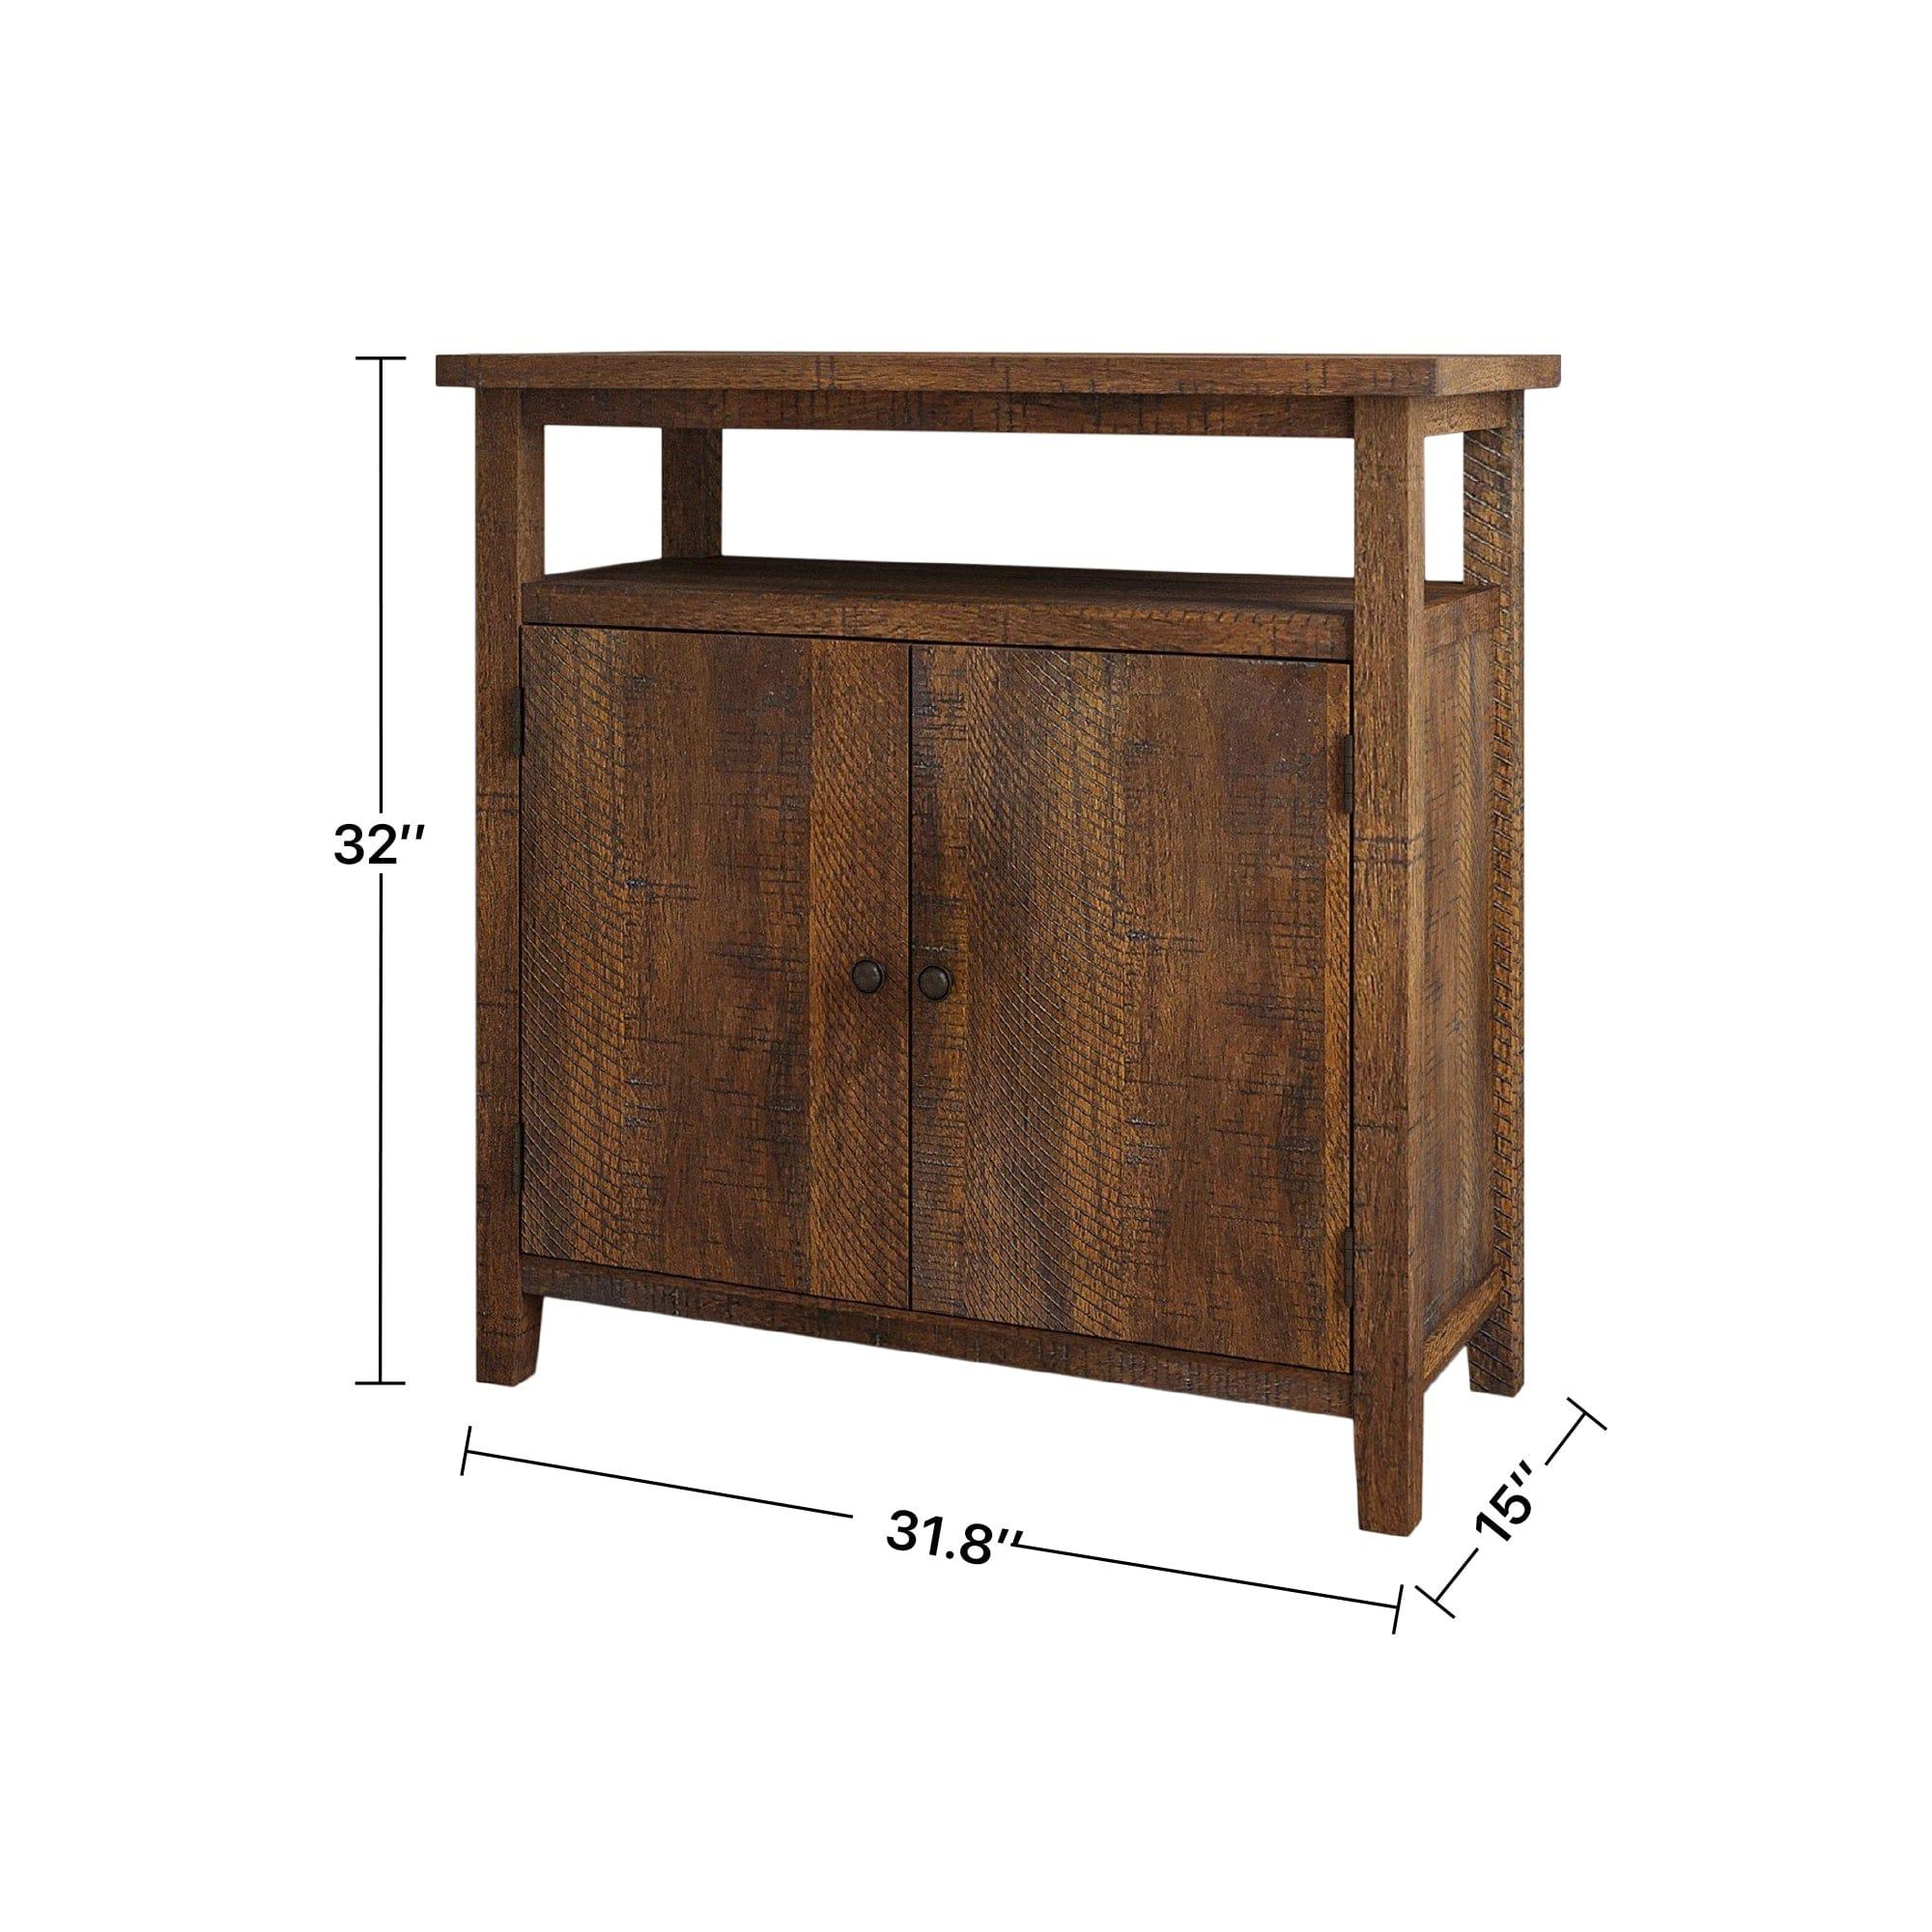 Shop Xavier Rough Sawn Natural Wood Console Cabinet Mademoiselle Home Decor